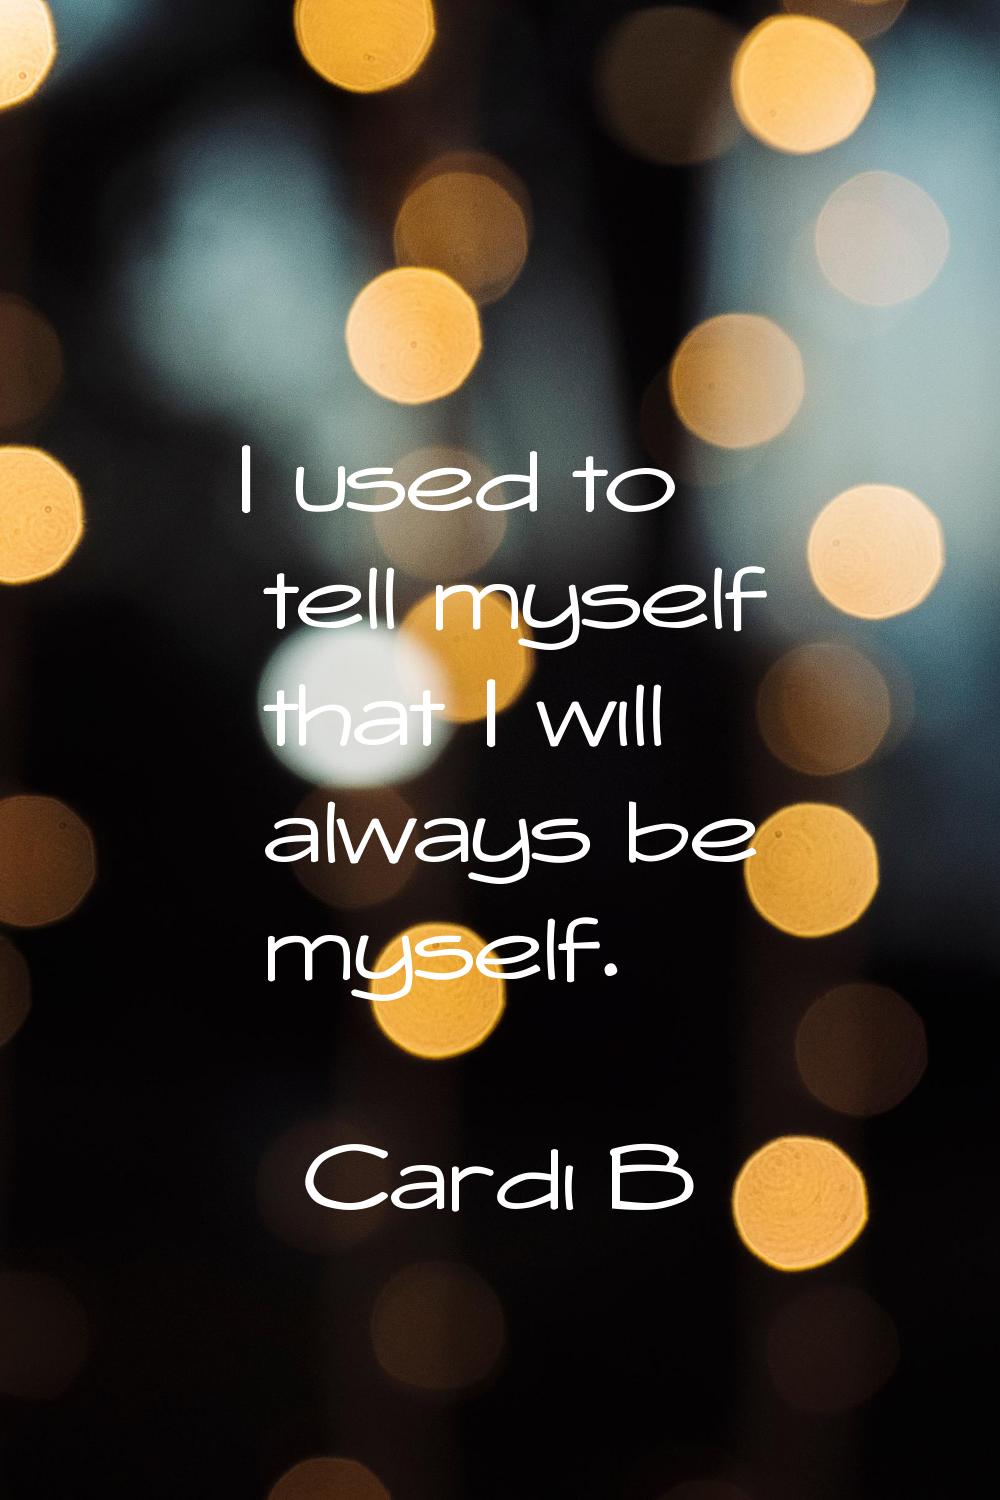 I used to tell myself that I will always be myself.